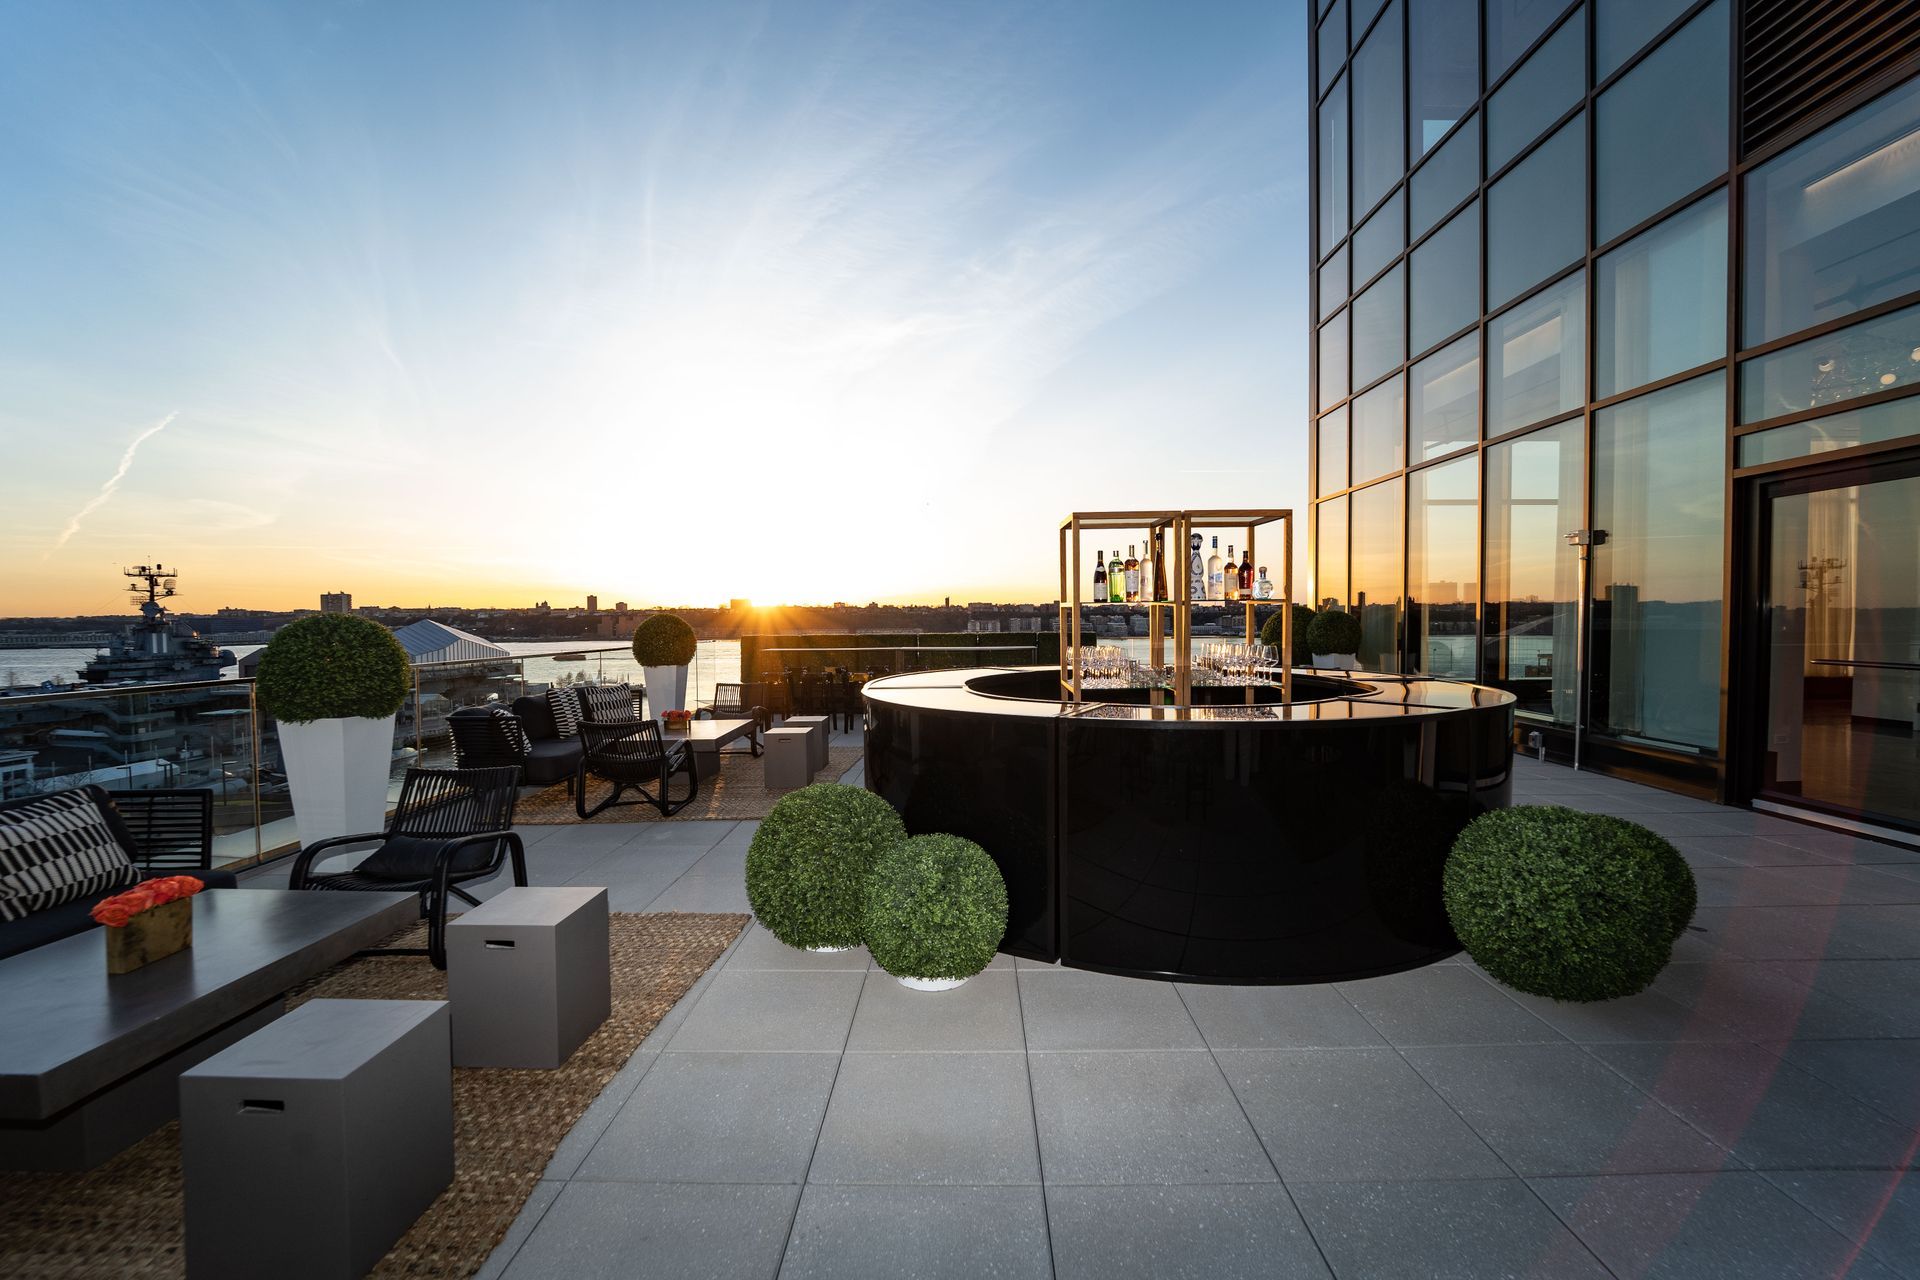 a patio with a bar and a view of the water at sunset